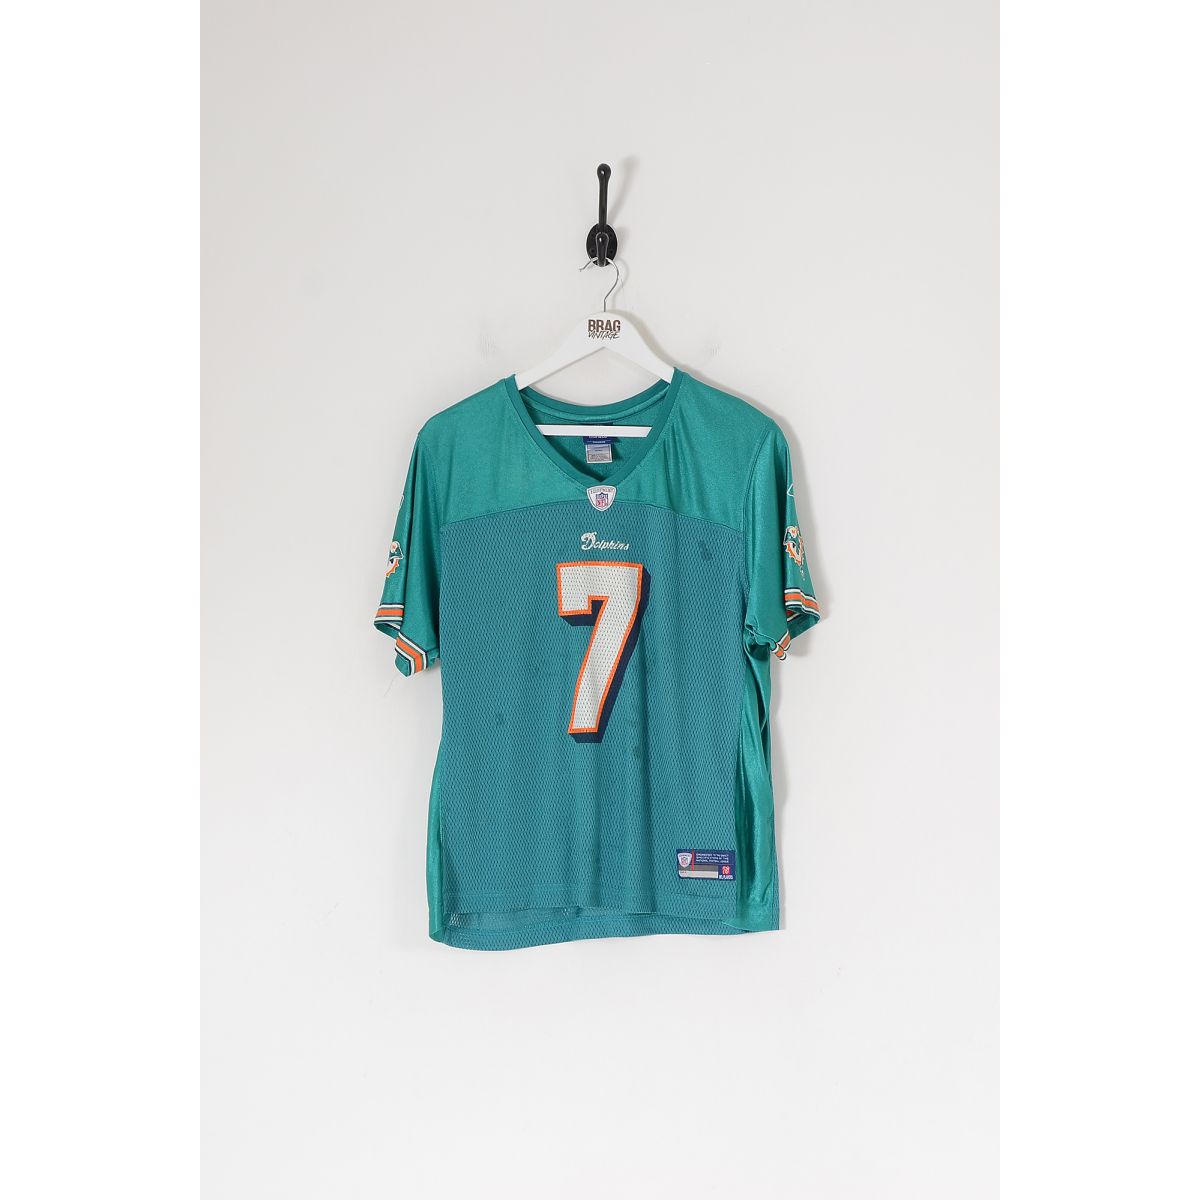 Vintage REEBOK NFL Miami Dolphins Henne American Football Jersey Turquoise XL